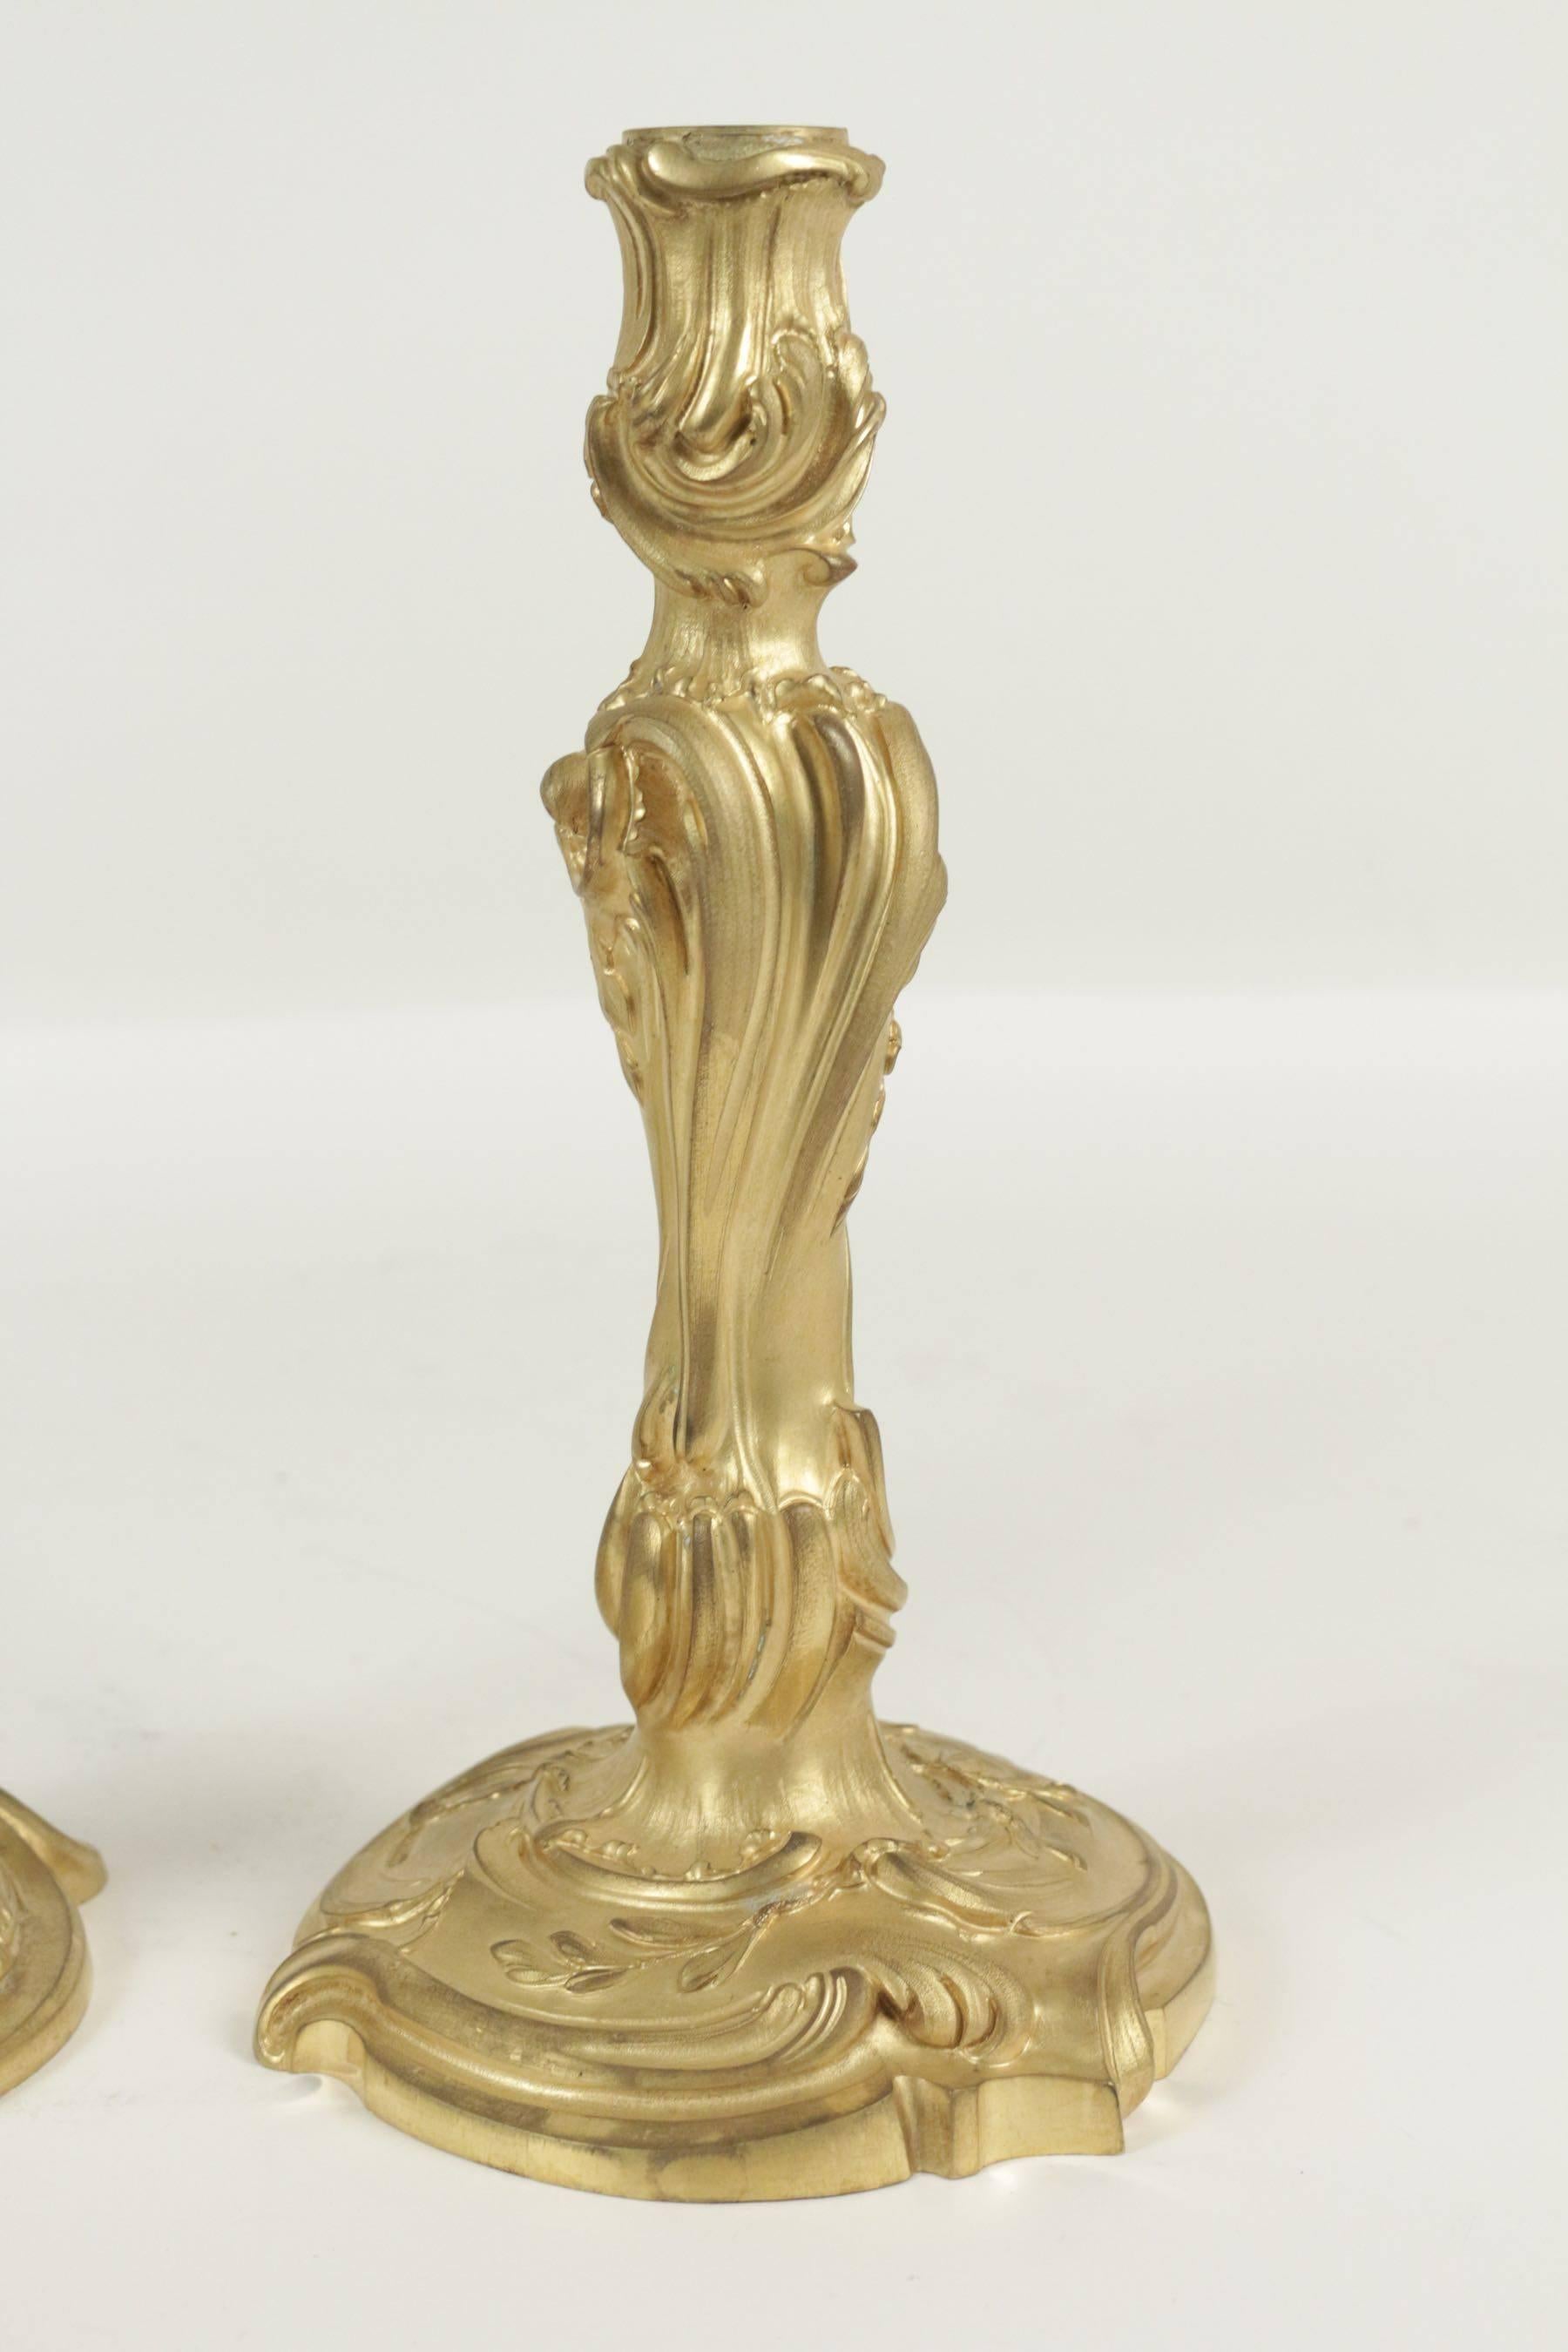 Gilt Pair of Candlesticks in Bronze from the 19th Century in the Louis XV Style